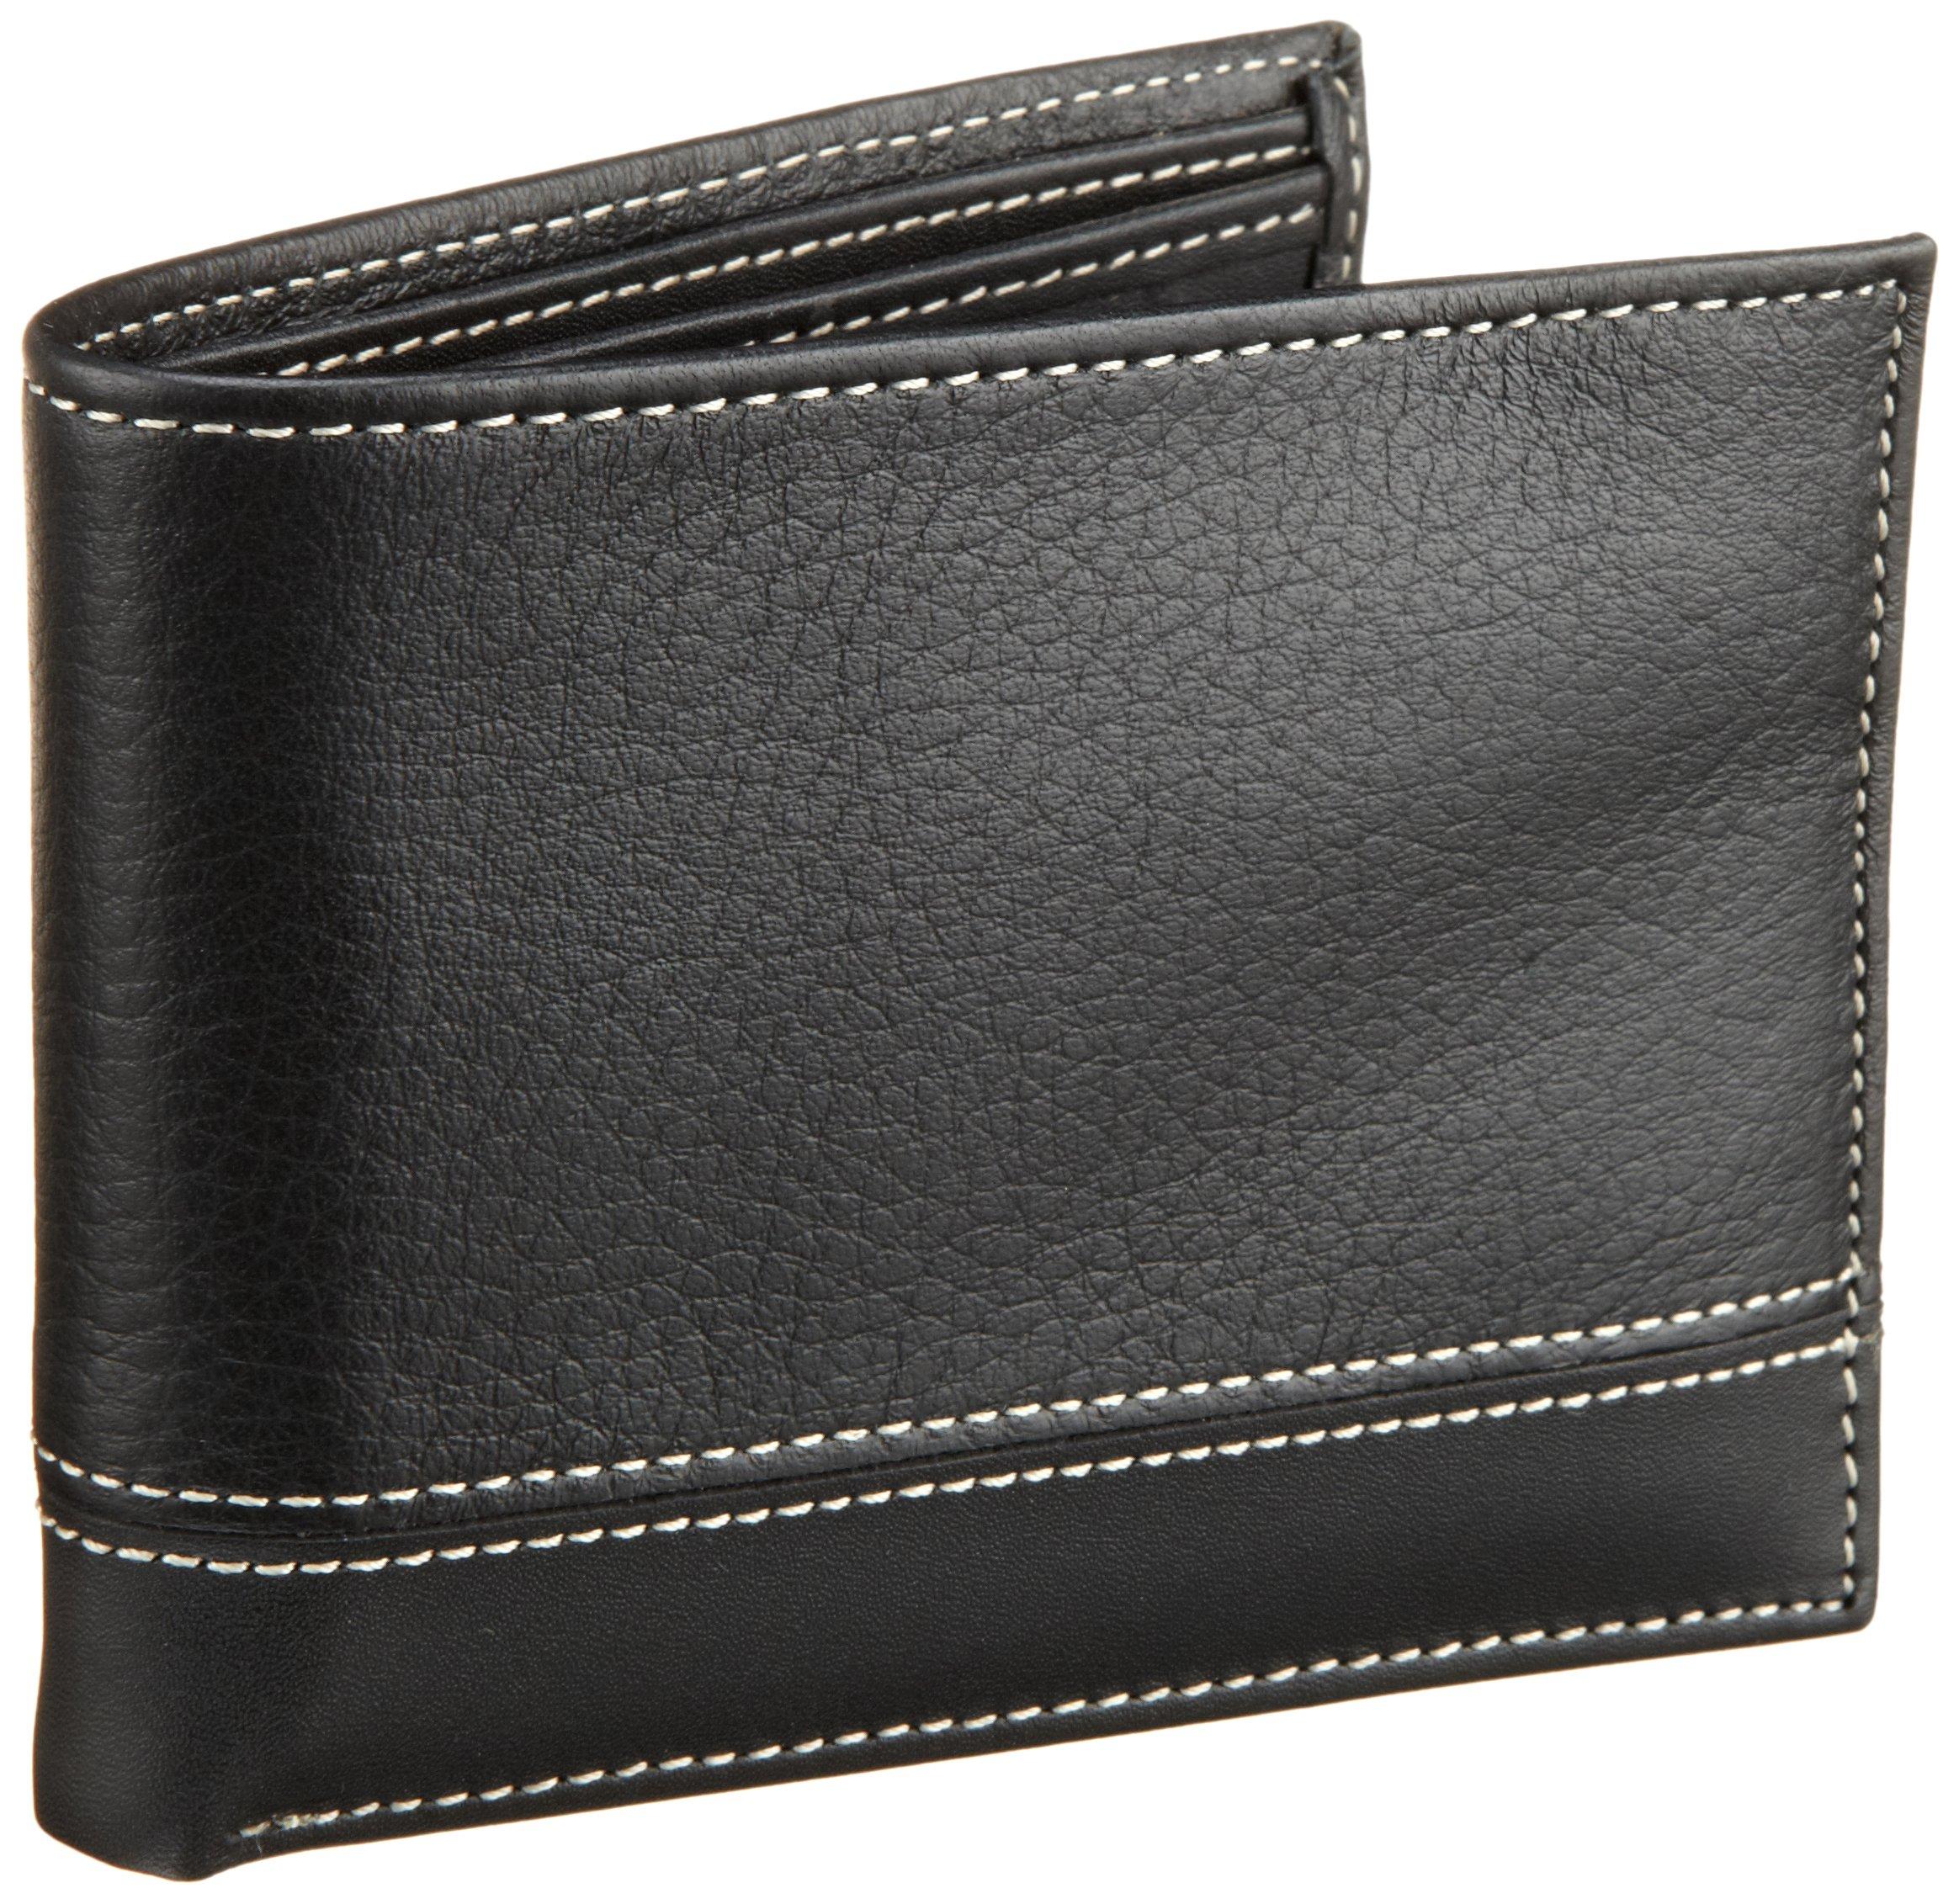 Perry Ellis Leather Sheridan Passcase Wallet in Black for Men Save 20